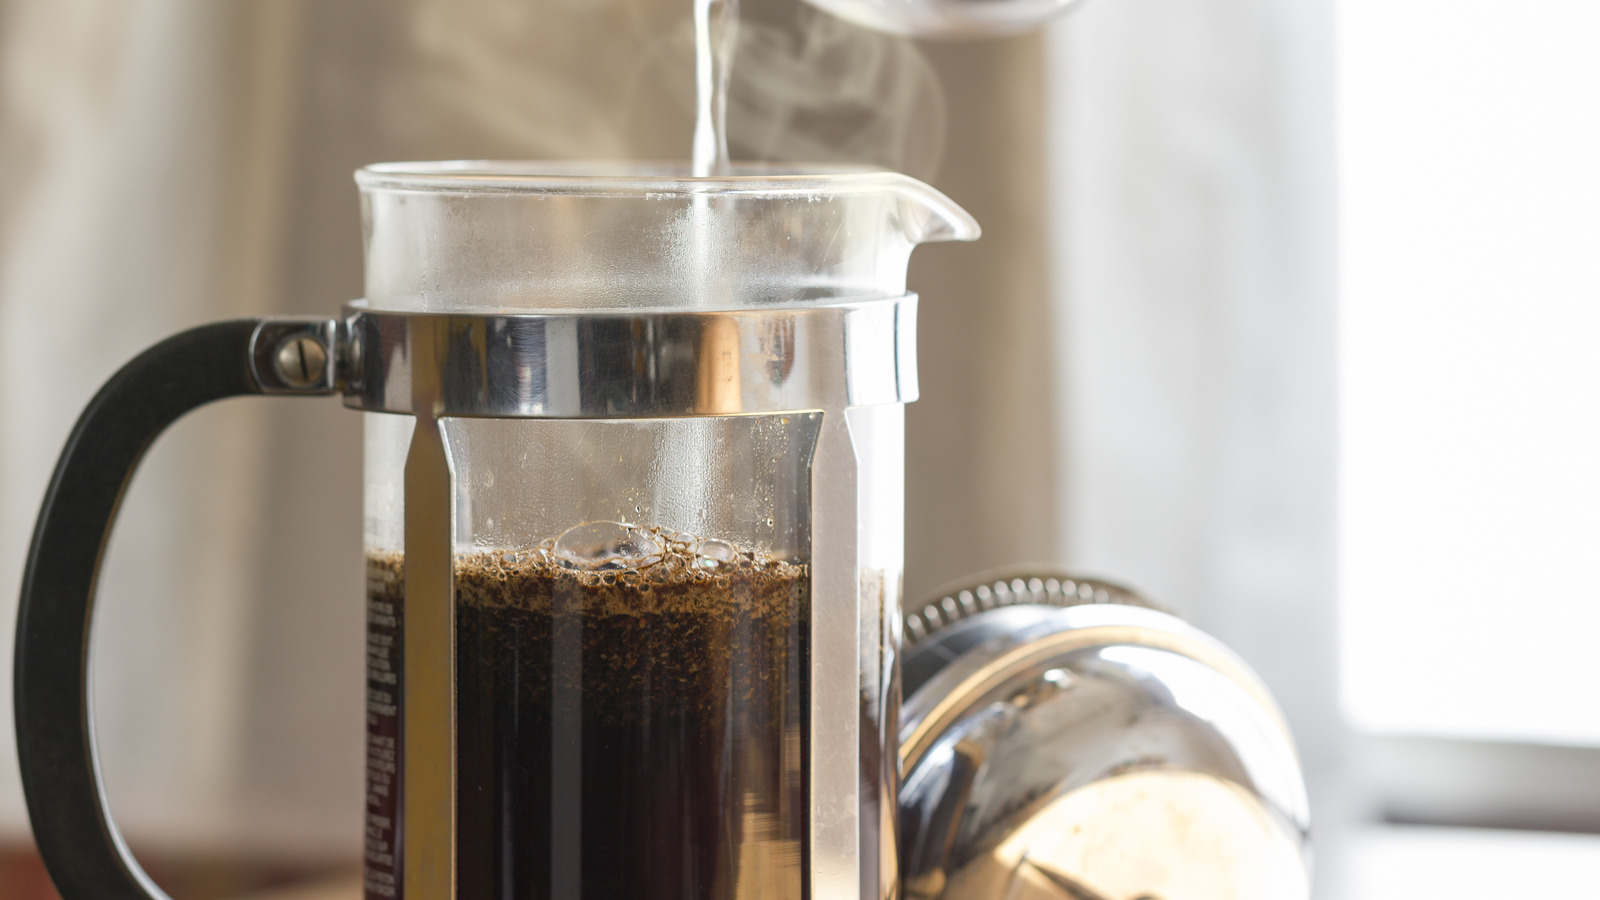 https://www.tastingtable.com/img/gallery/the-ideal-brewing-temperature-for-french-press-coffee/l-intro-1687817114.jpg